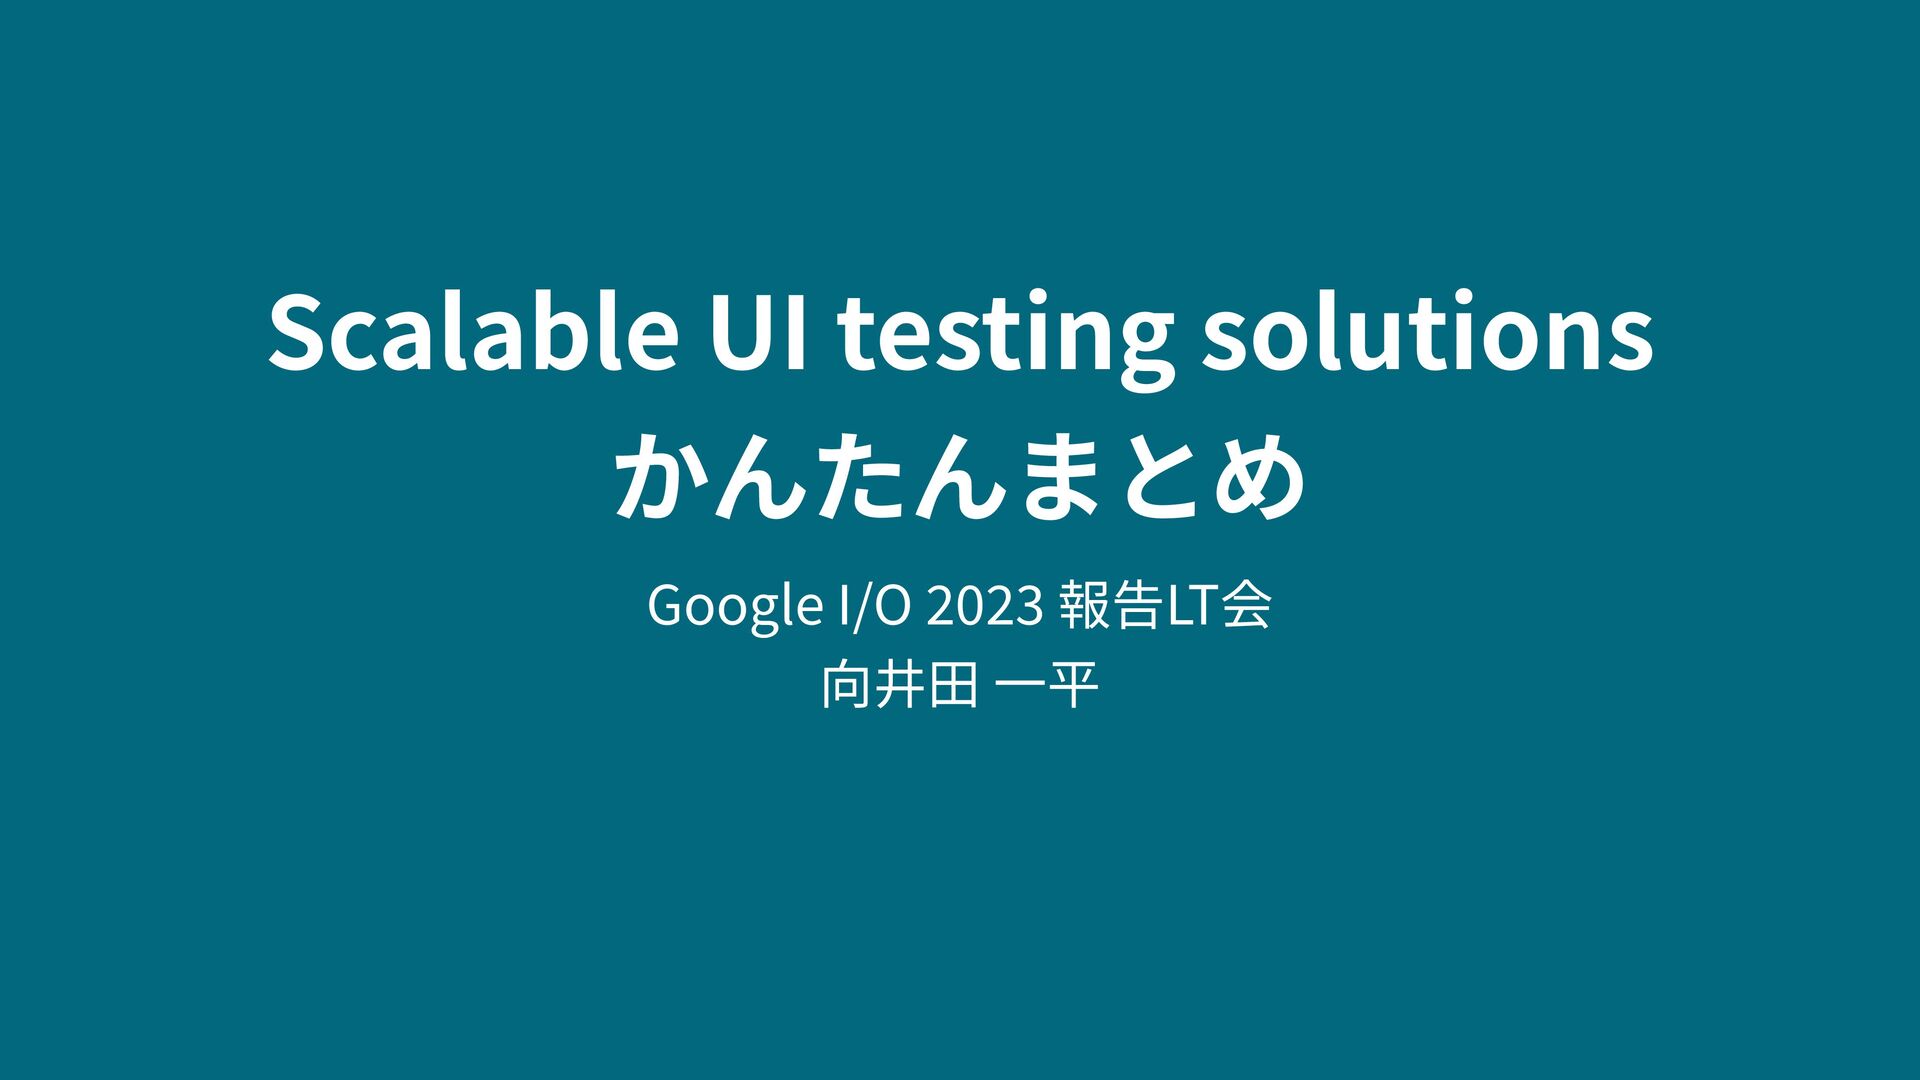 Slide Top: Scalable UI testing solutions かんたんまとめ